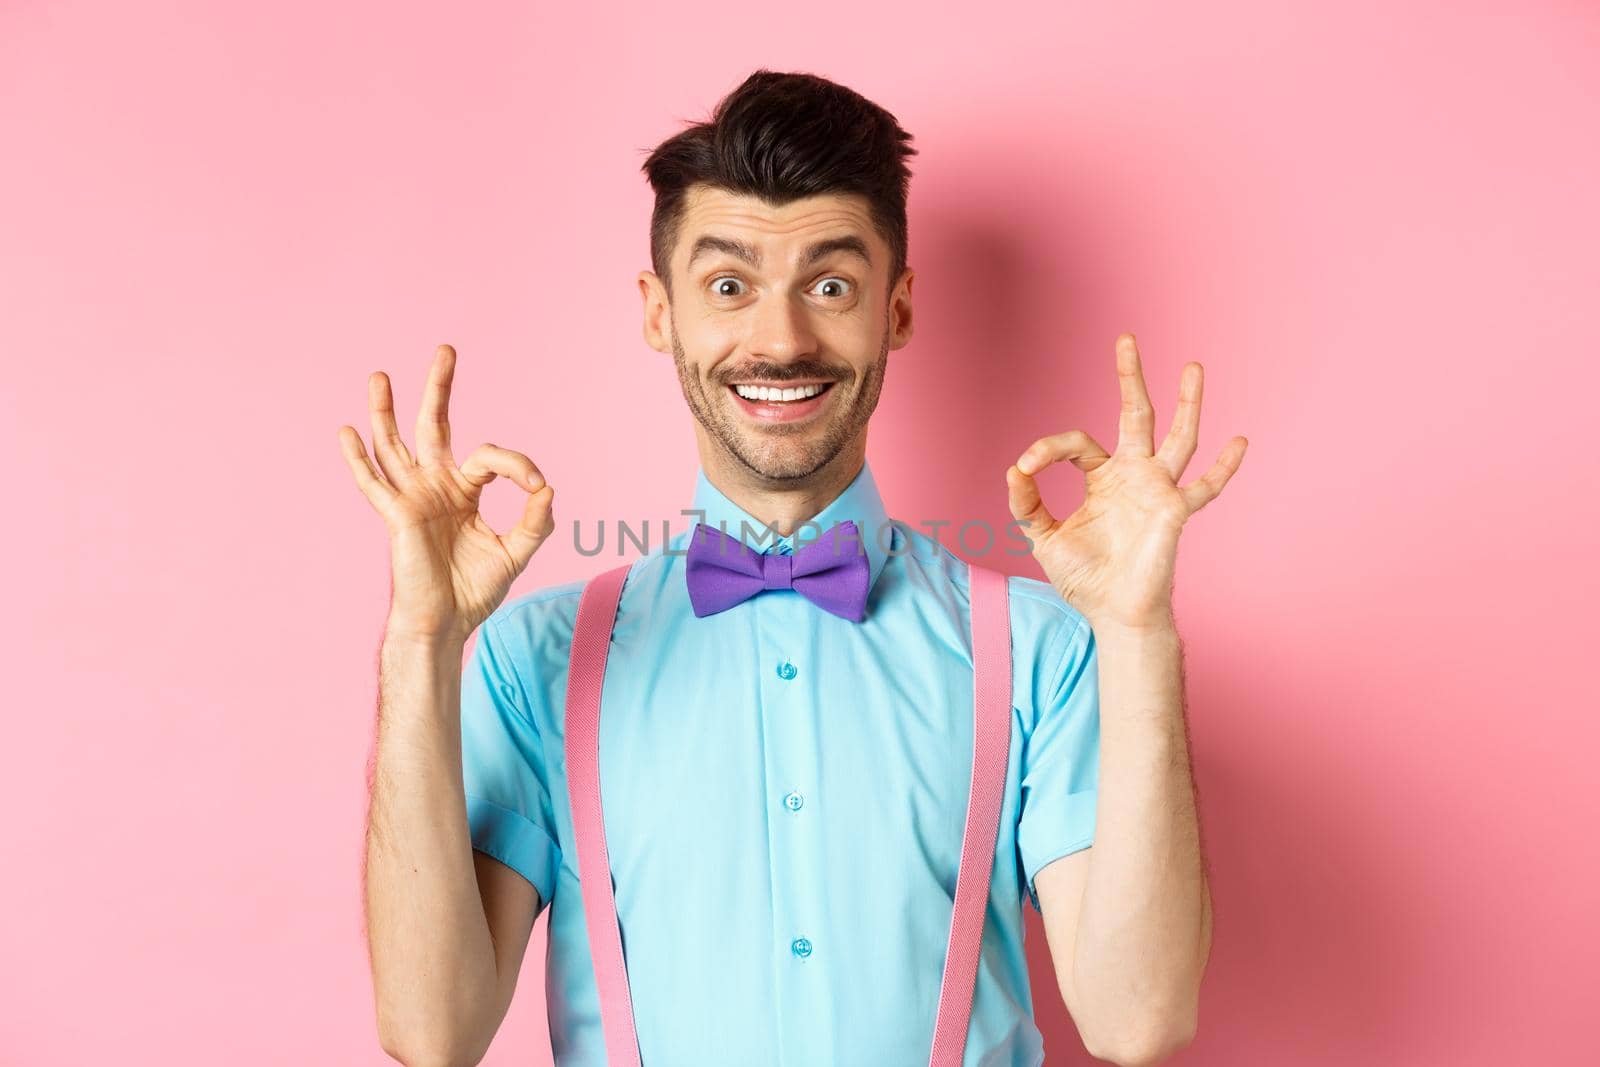 Cheerful handsome man smiling, showing okay gestures in approval, praising good choice, liking advertisement, standing on pink background.